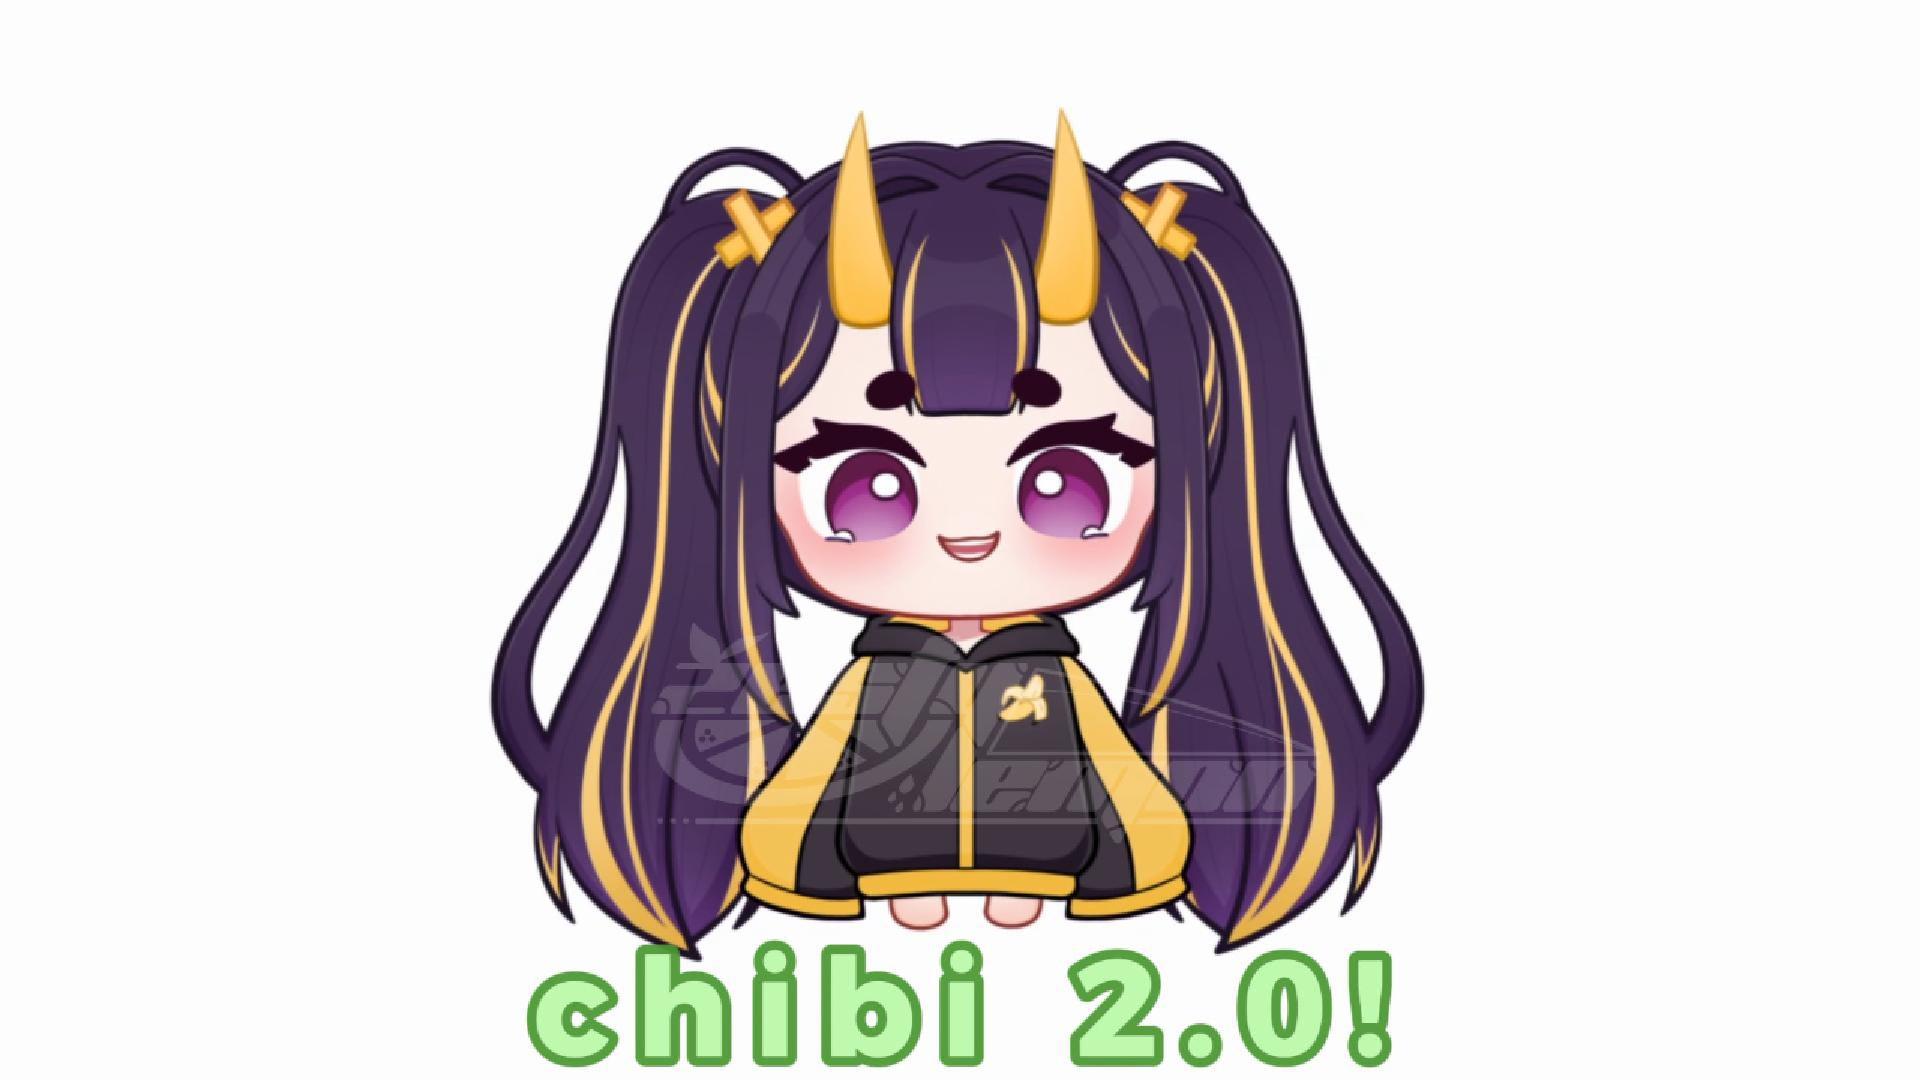 chibi 2.0 is here!